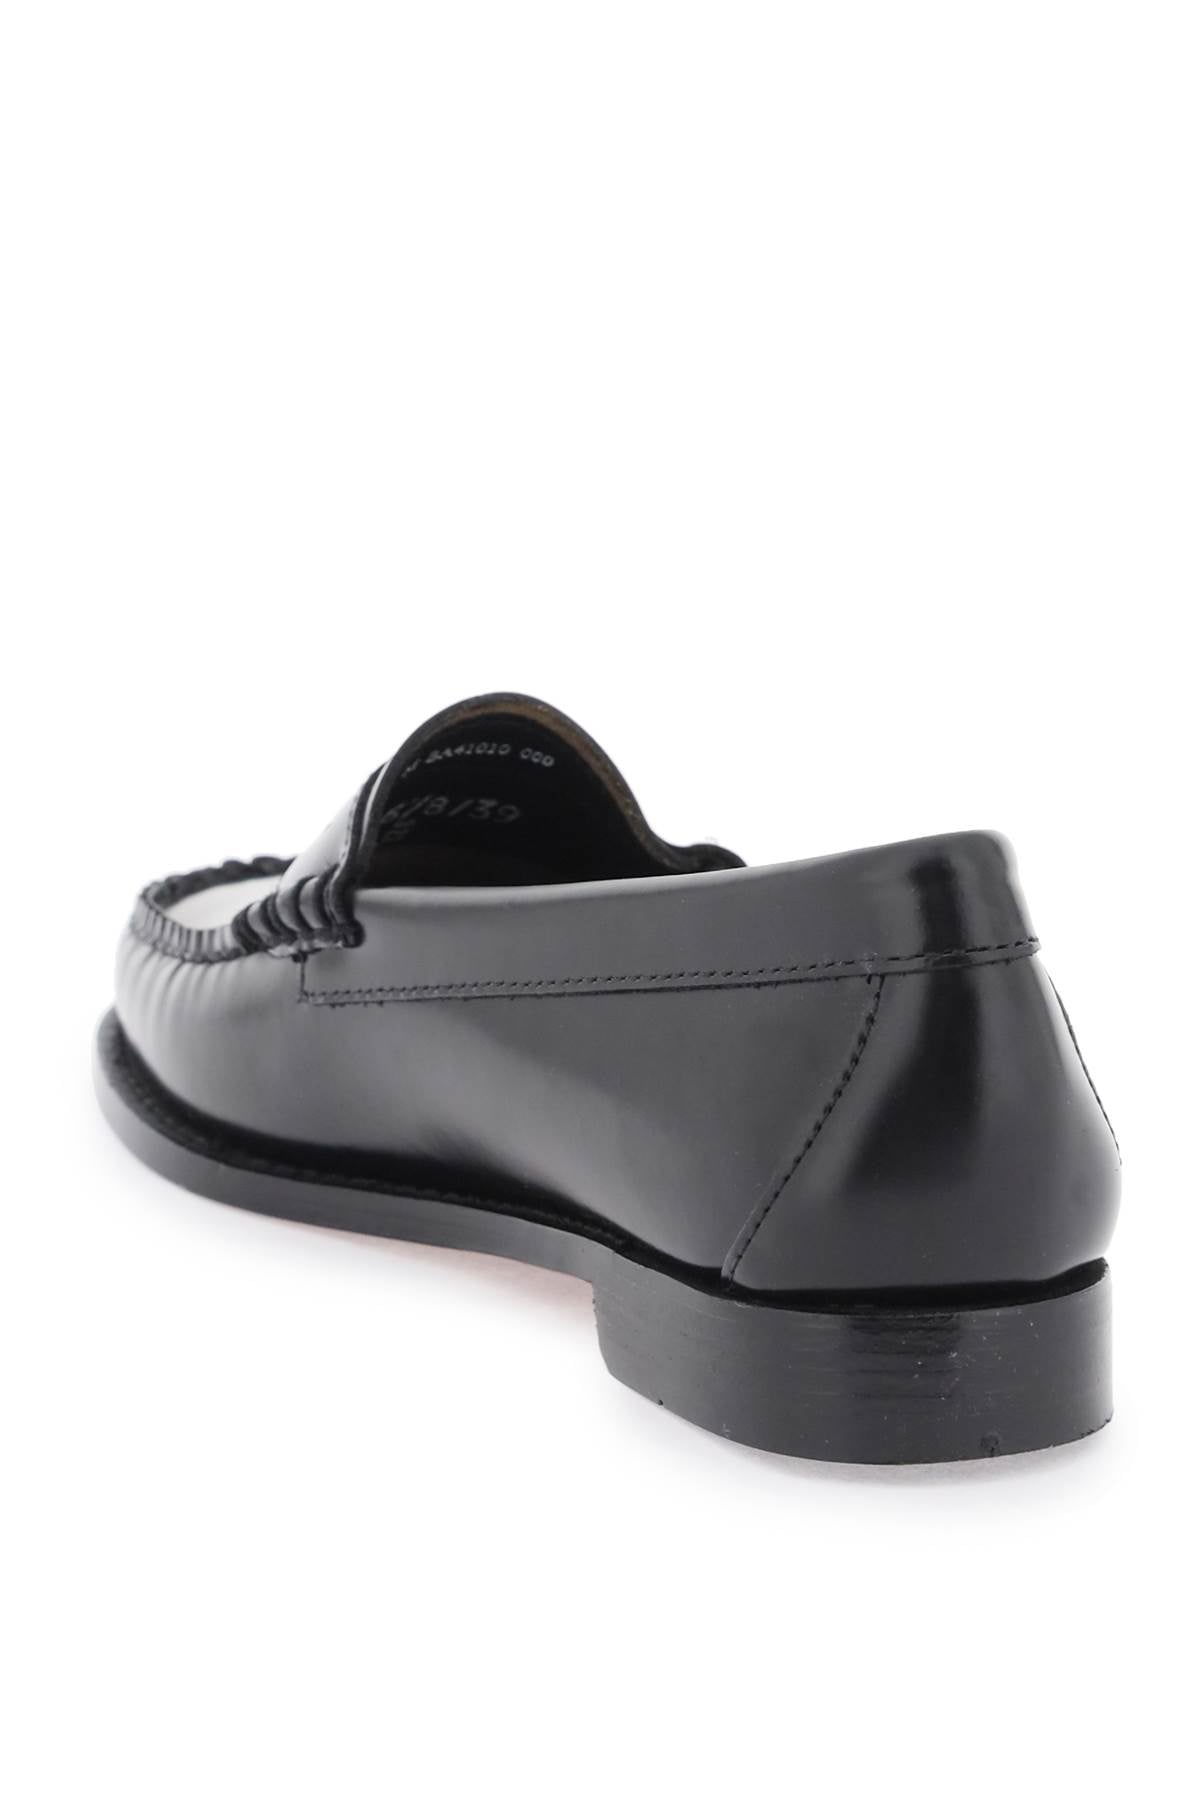 G.h. bass weejuns penny loafers-2